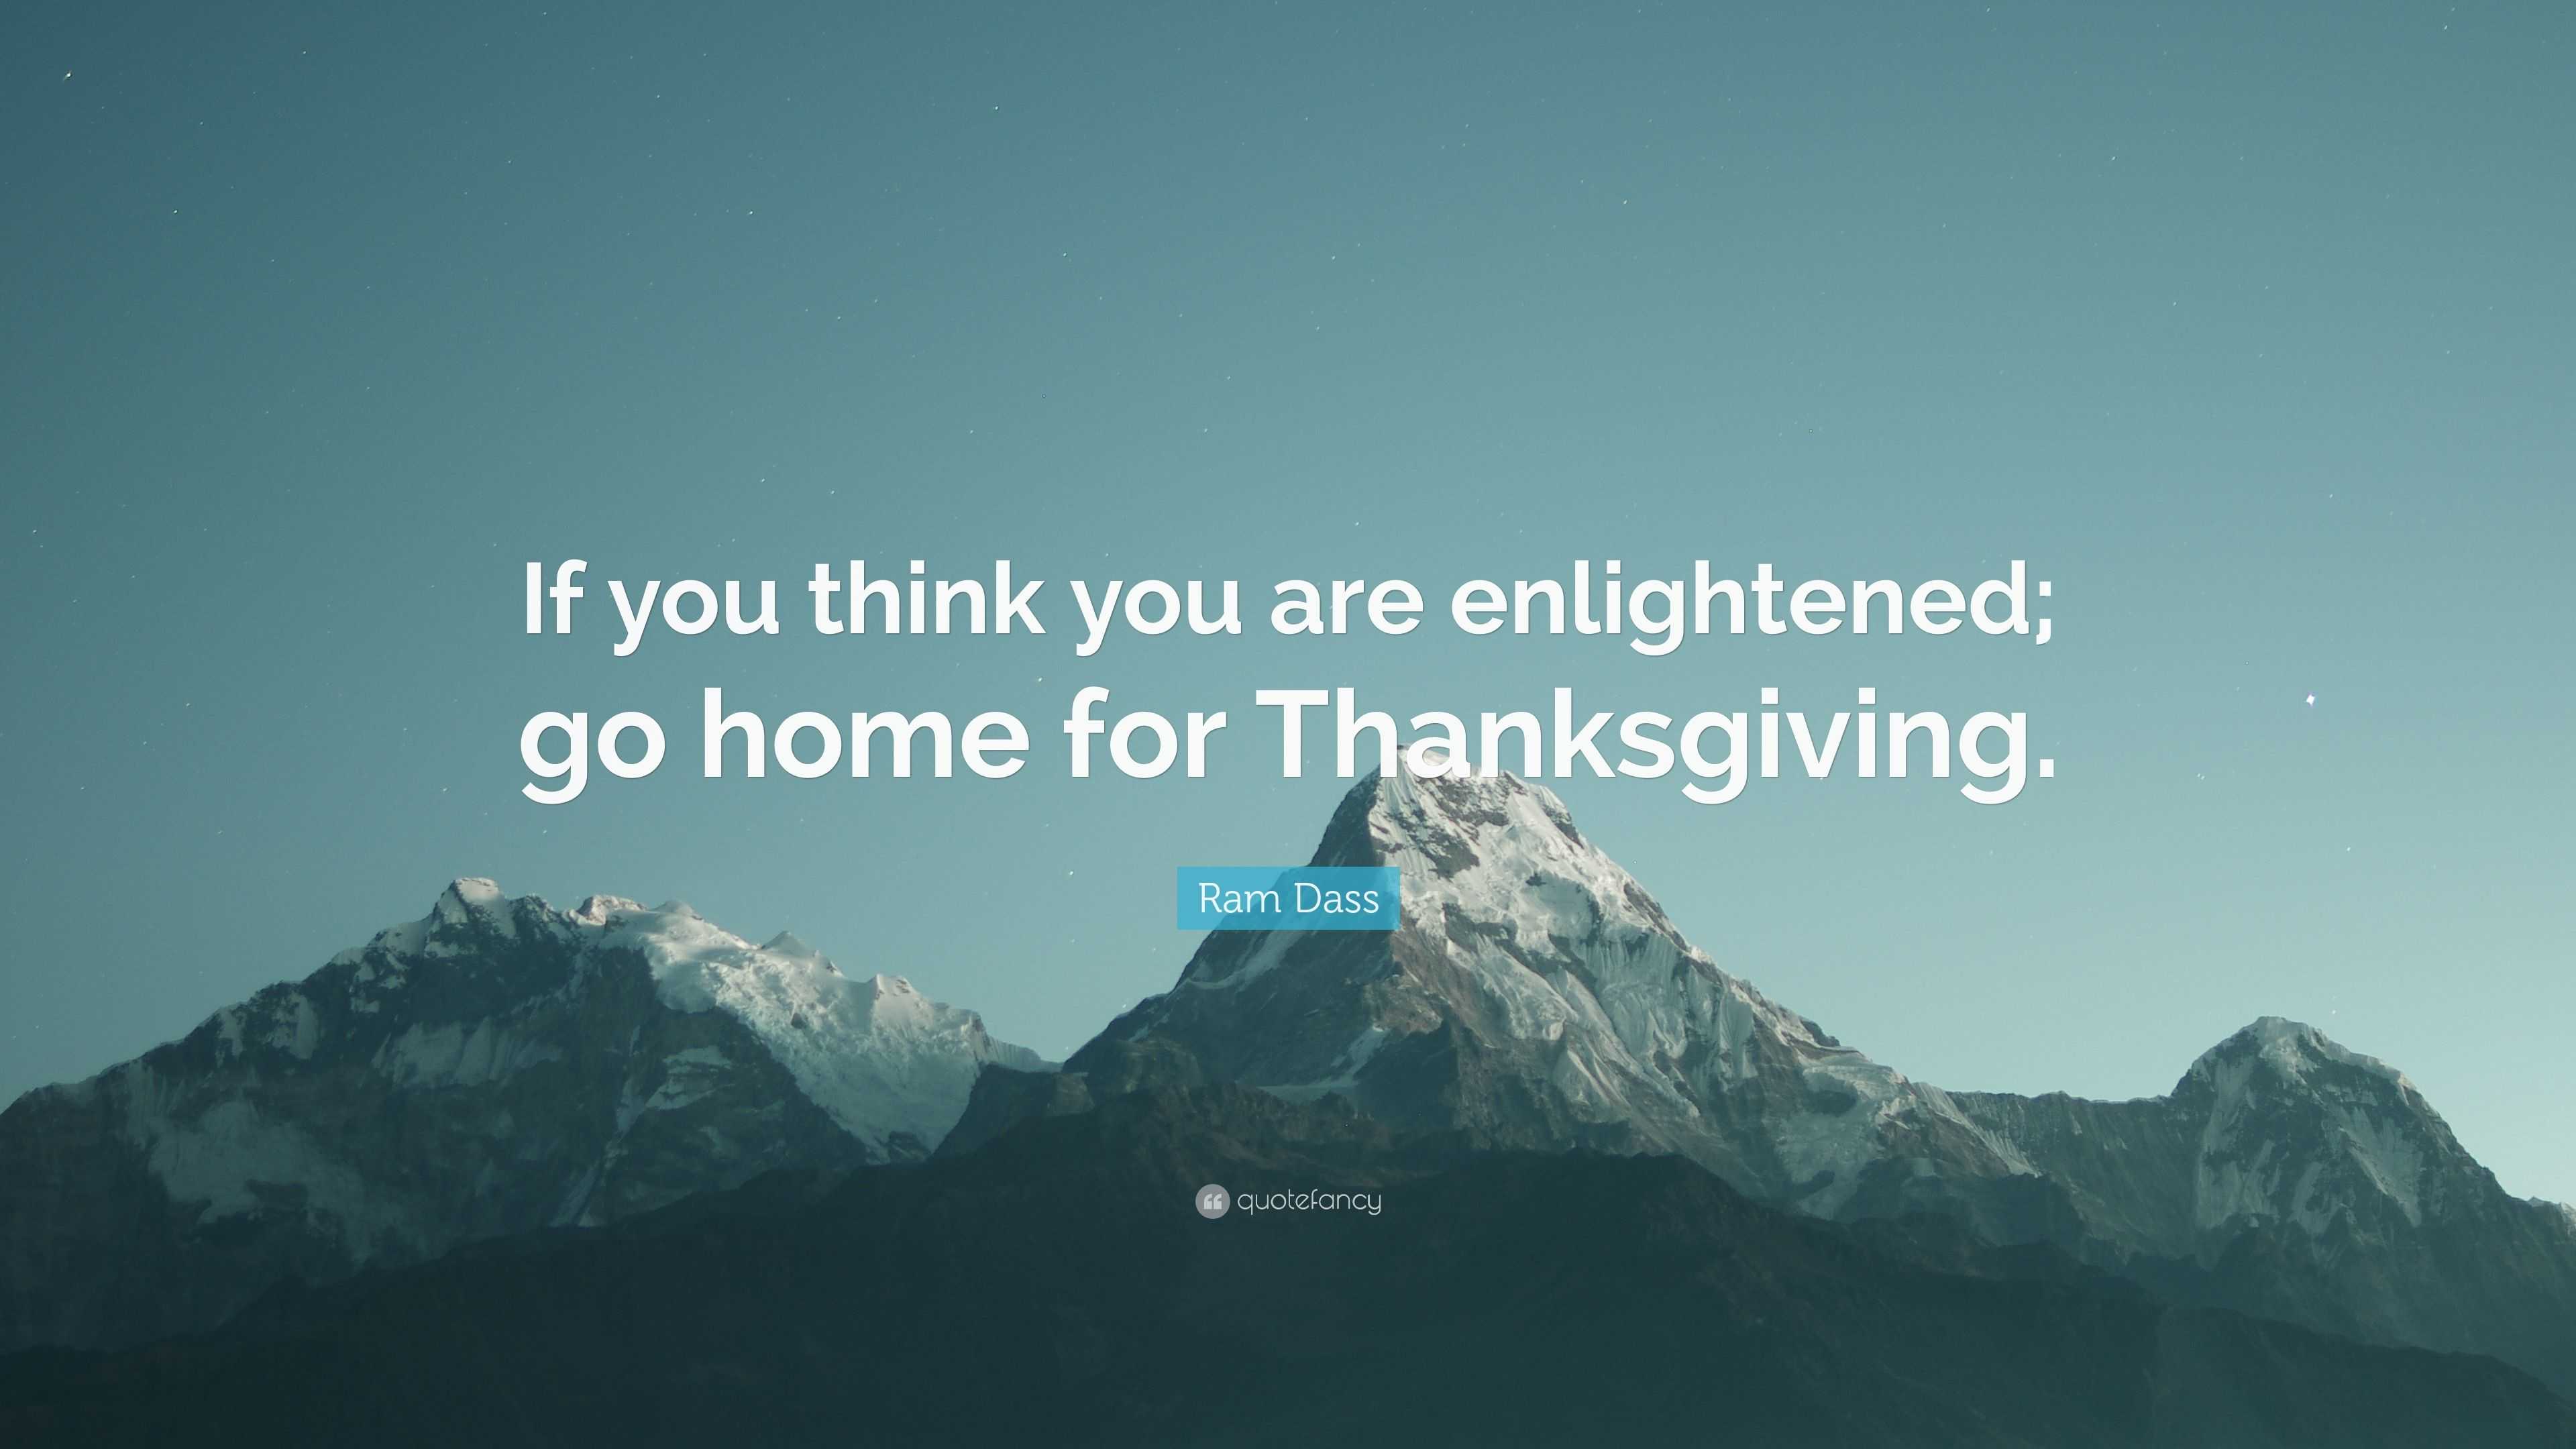 Ram Dass Quote: “If you think you are go home for Thanksgiving.”